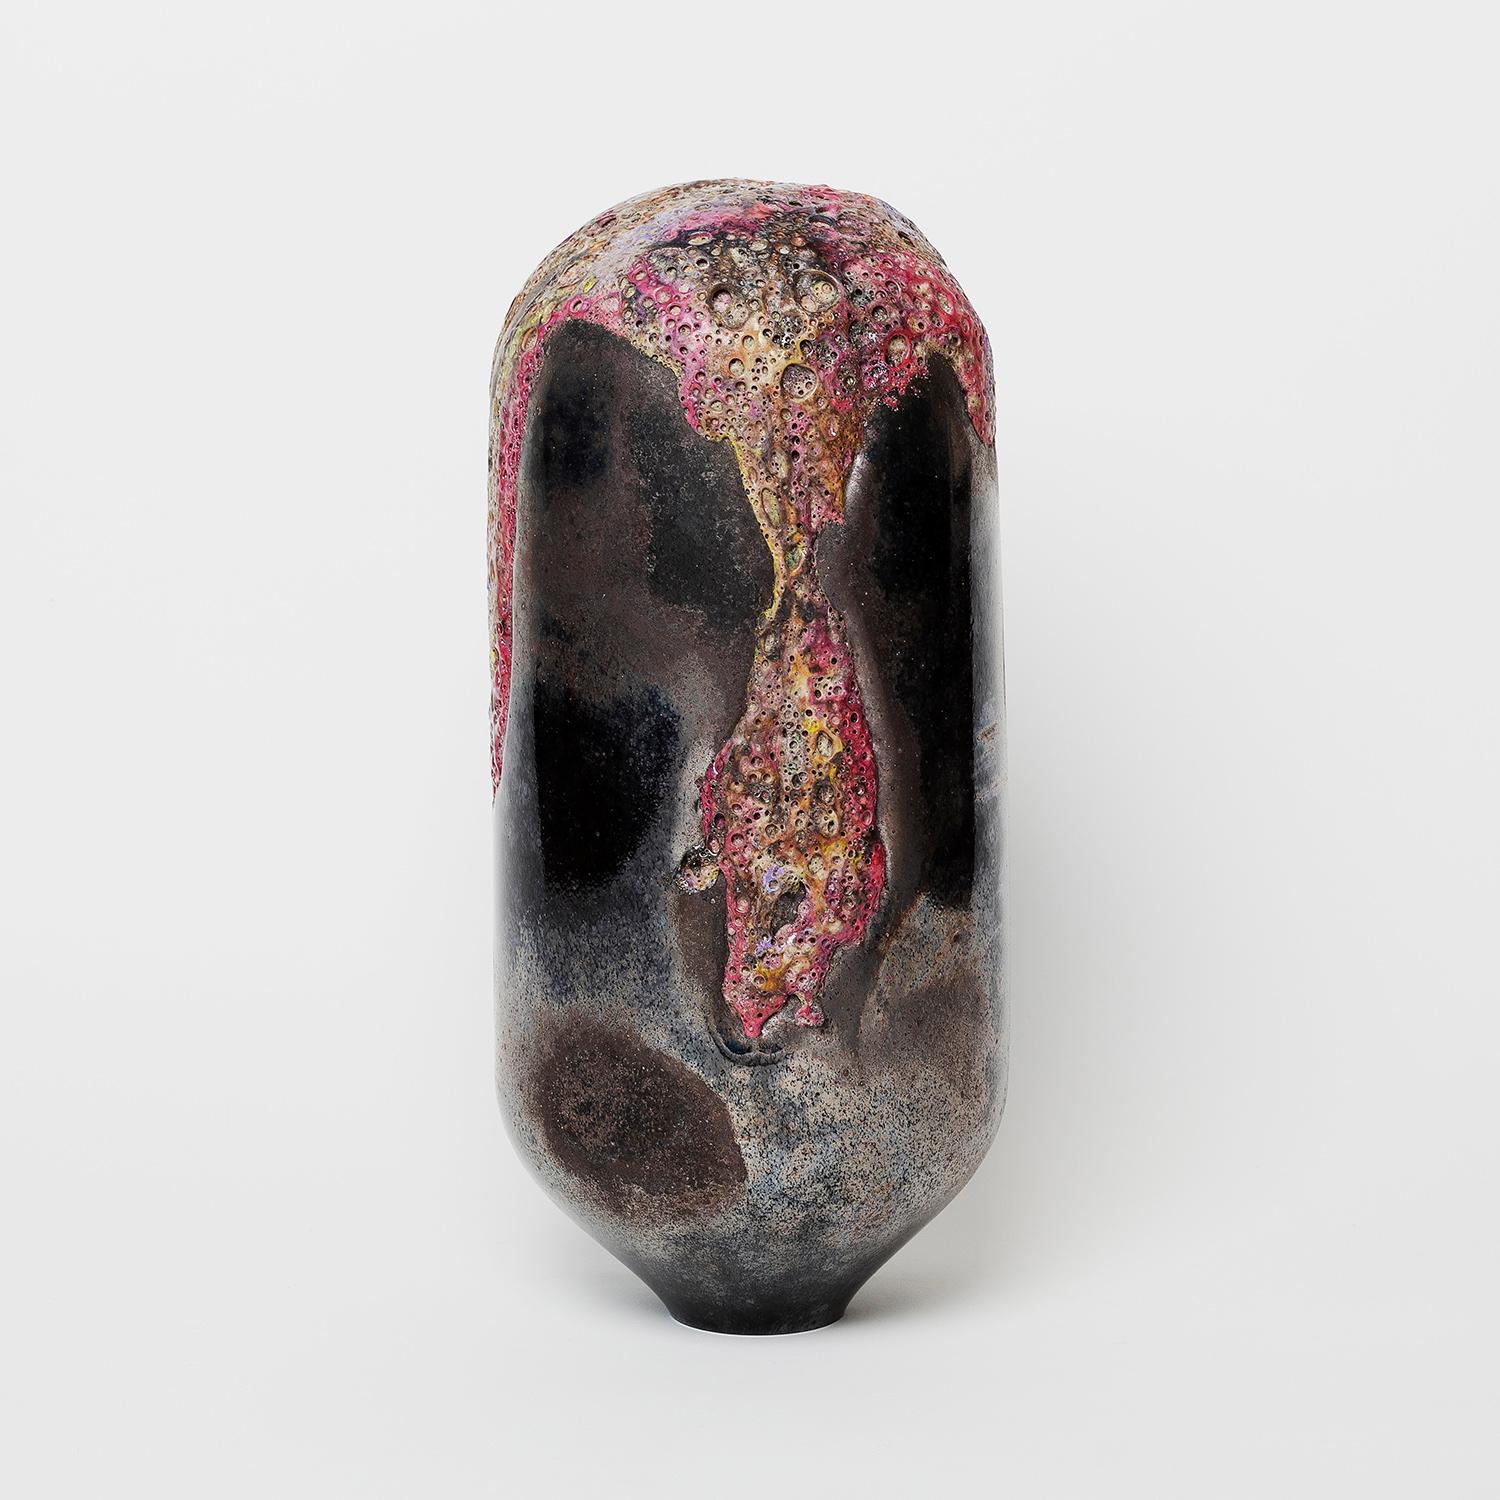 Origin Pink 0521 Decorative Object by Morten Klitgaard
One Of A Kind
Dimensions: D 18 x W 18 x H 38 cm.
Materials: Blown glass, glass pigment, oxides and ash.

Morten Klitgaard is born in Lønstrup, Denmark in 1981. Growing up in the harsh climate of